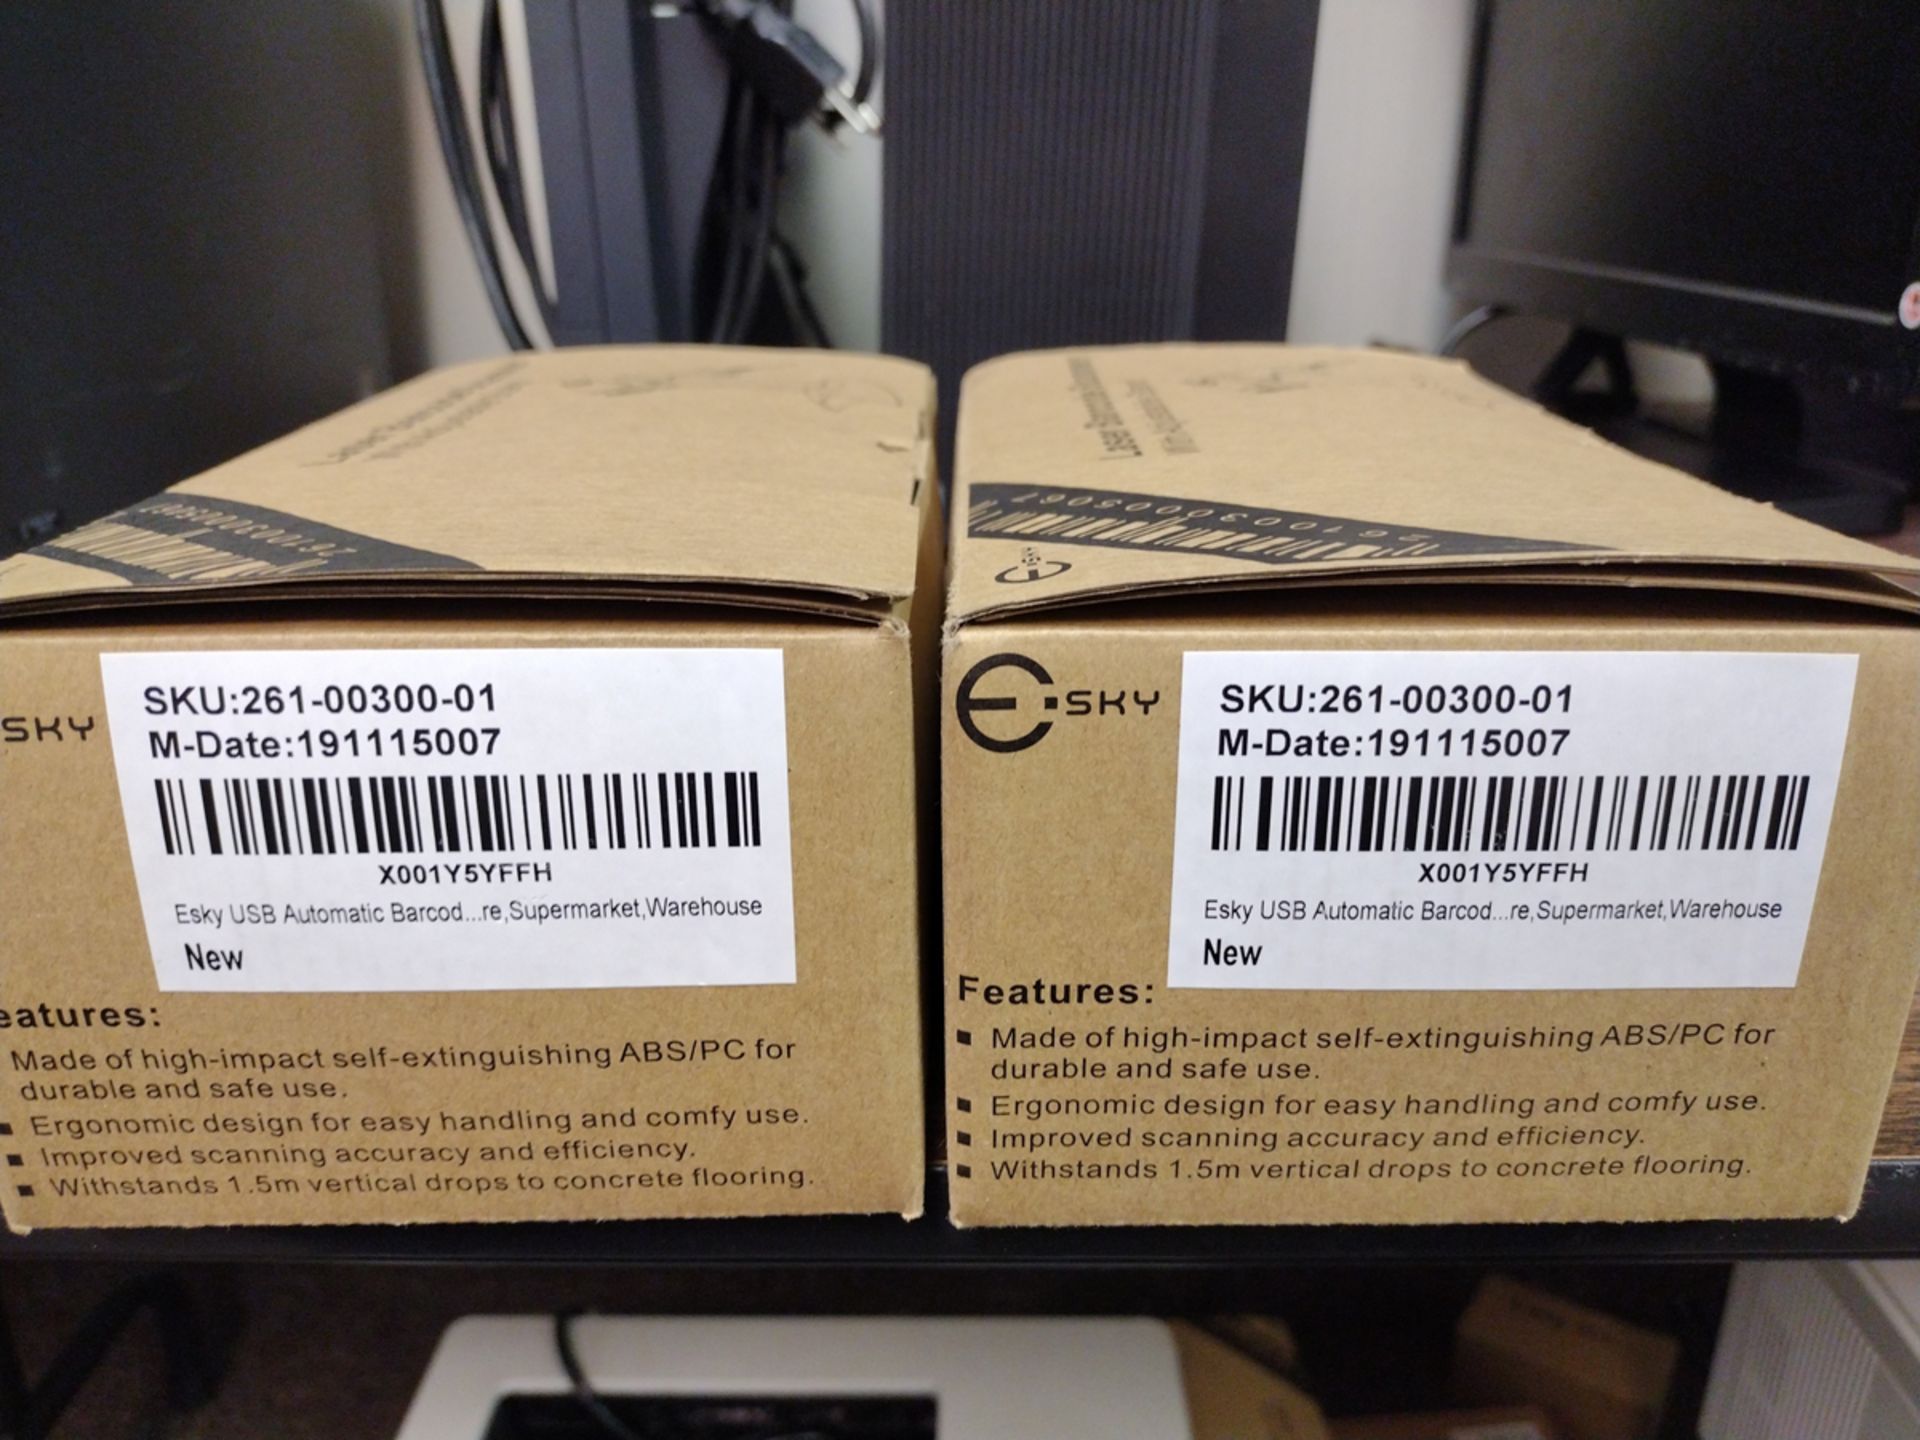 {Each} Esky USB Laser Barcode Scanner w/ Stand - Image 2 of 2